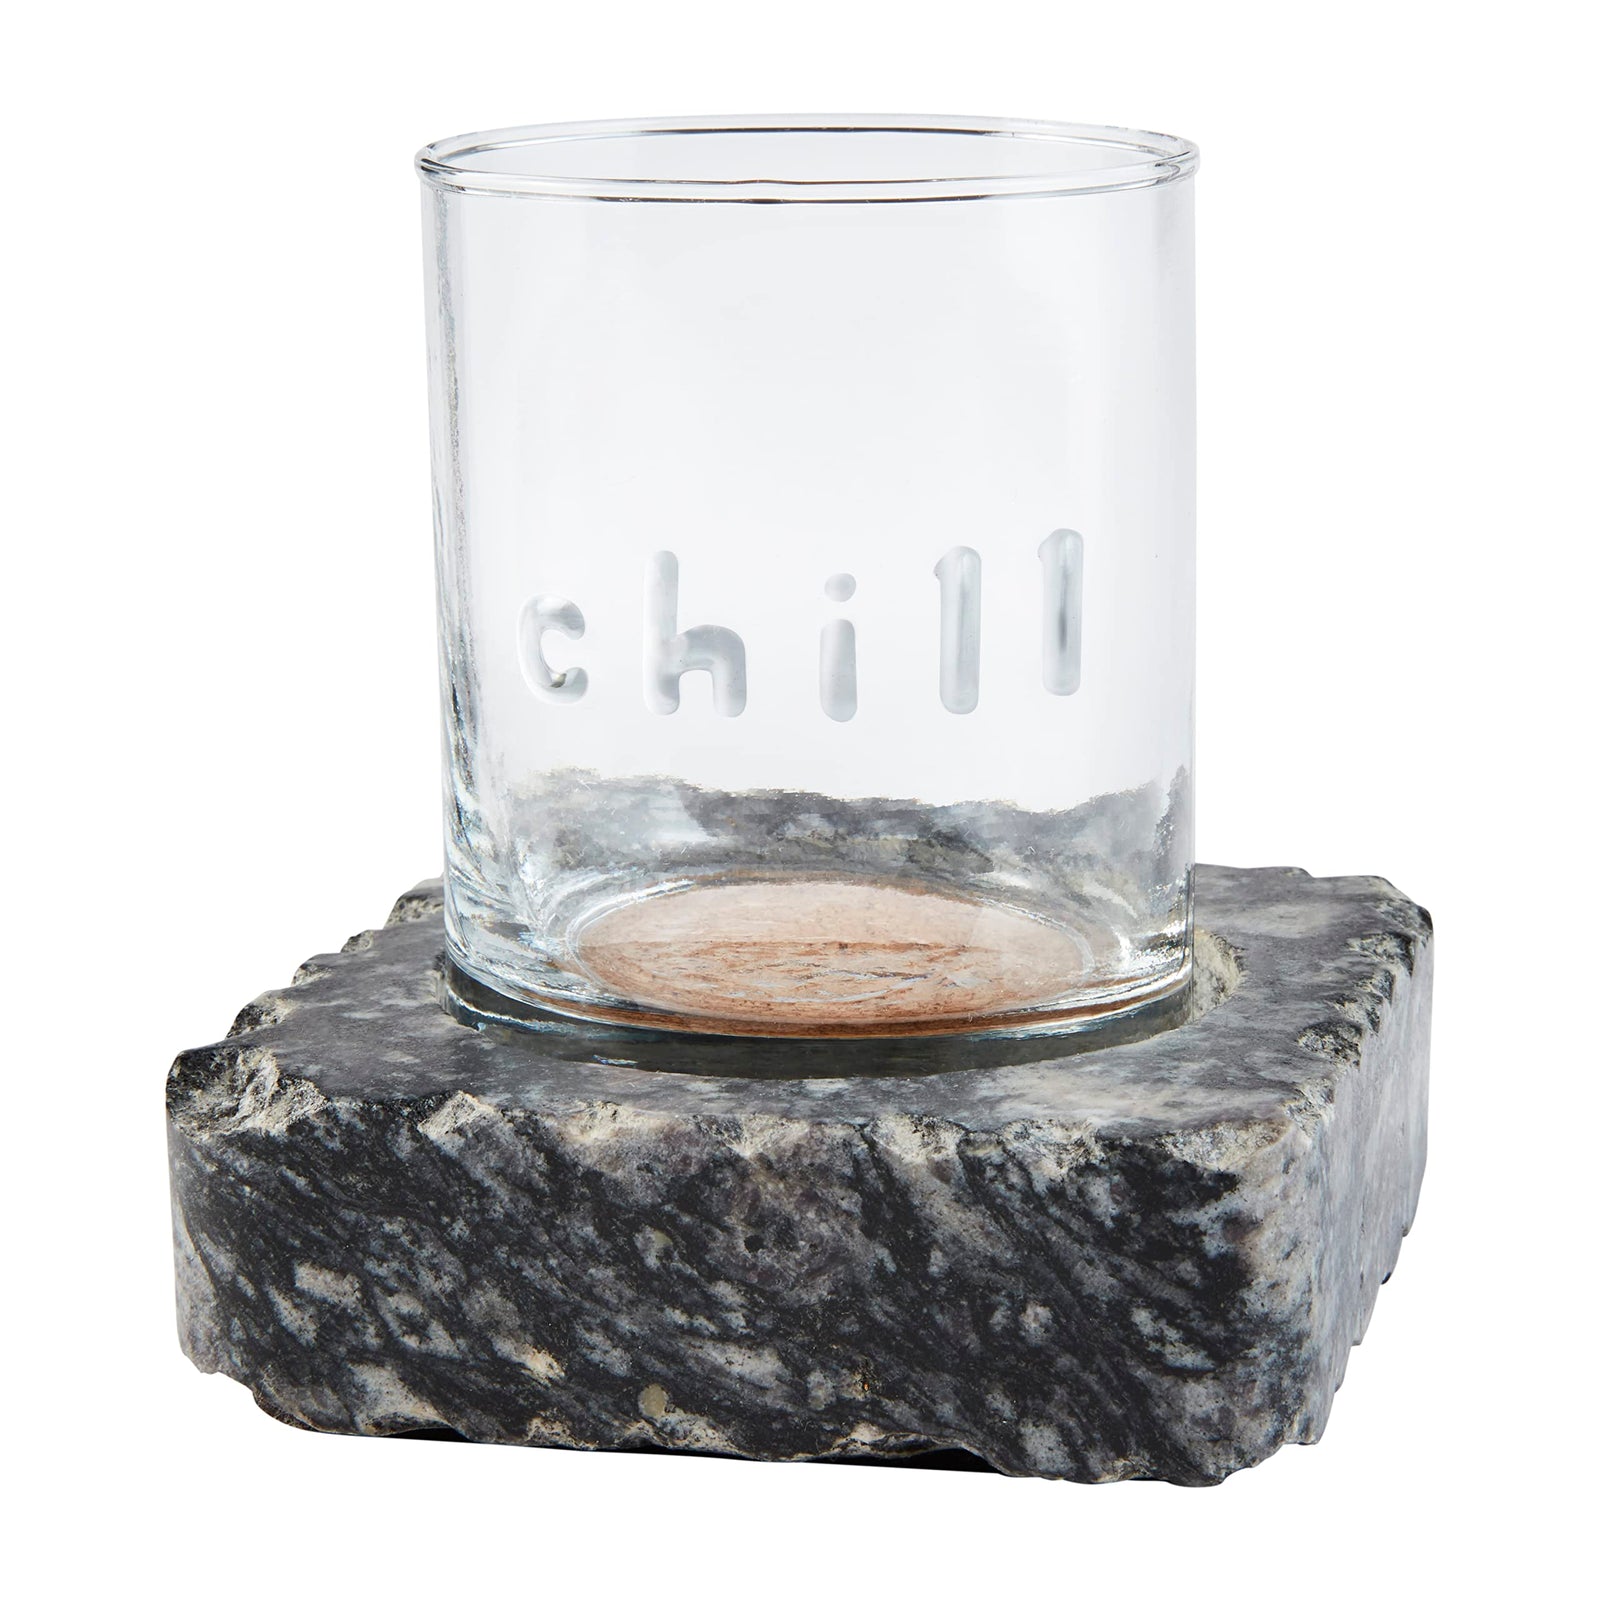 Doubled Old Fashioned Glass with Black Granite Chilling Stone Coaster (2 piece set)